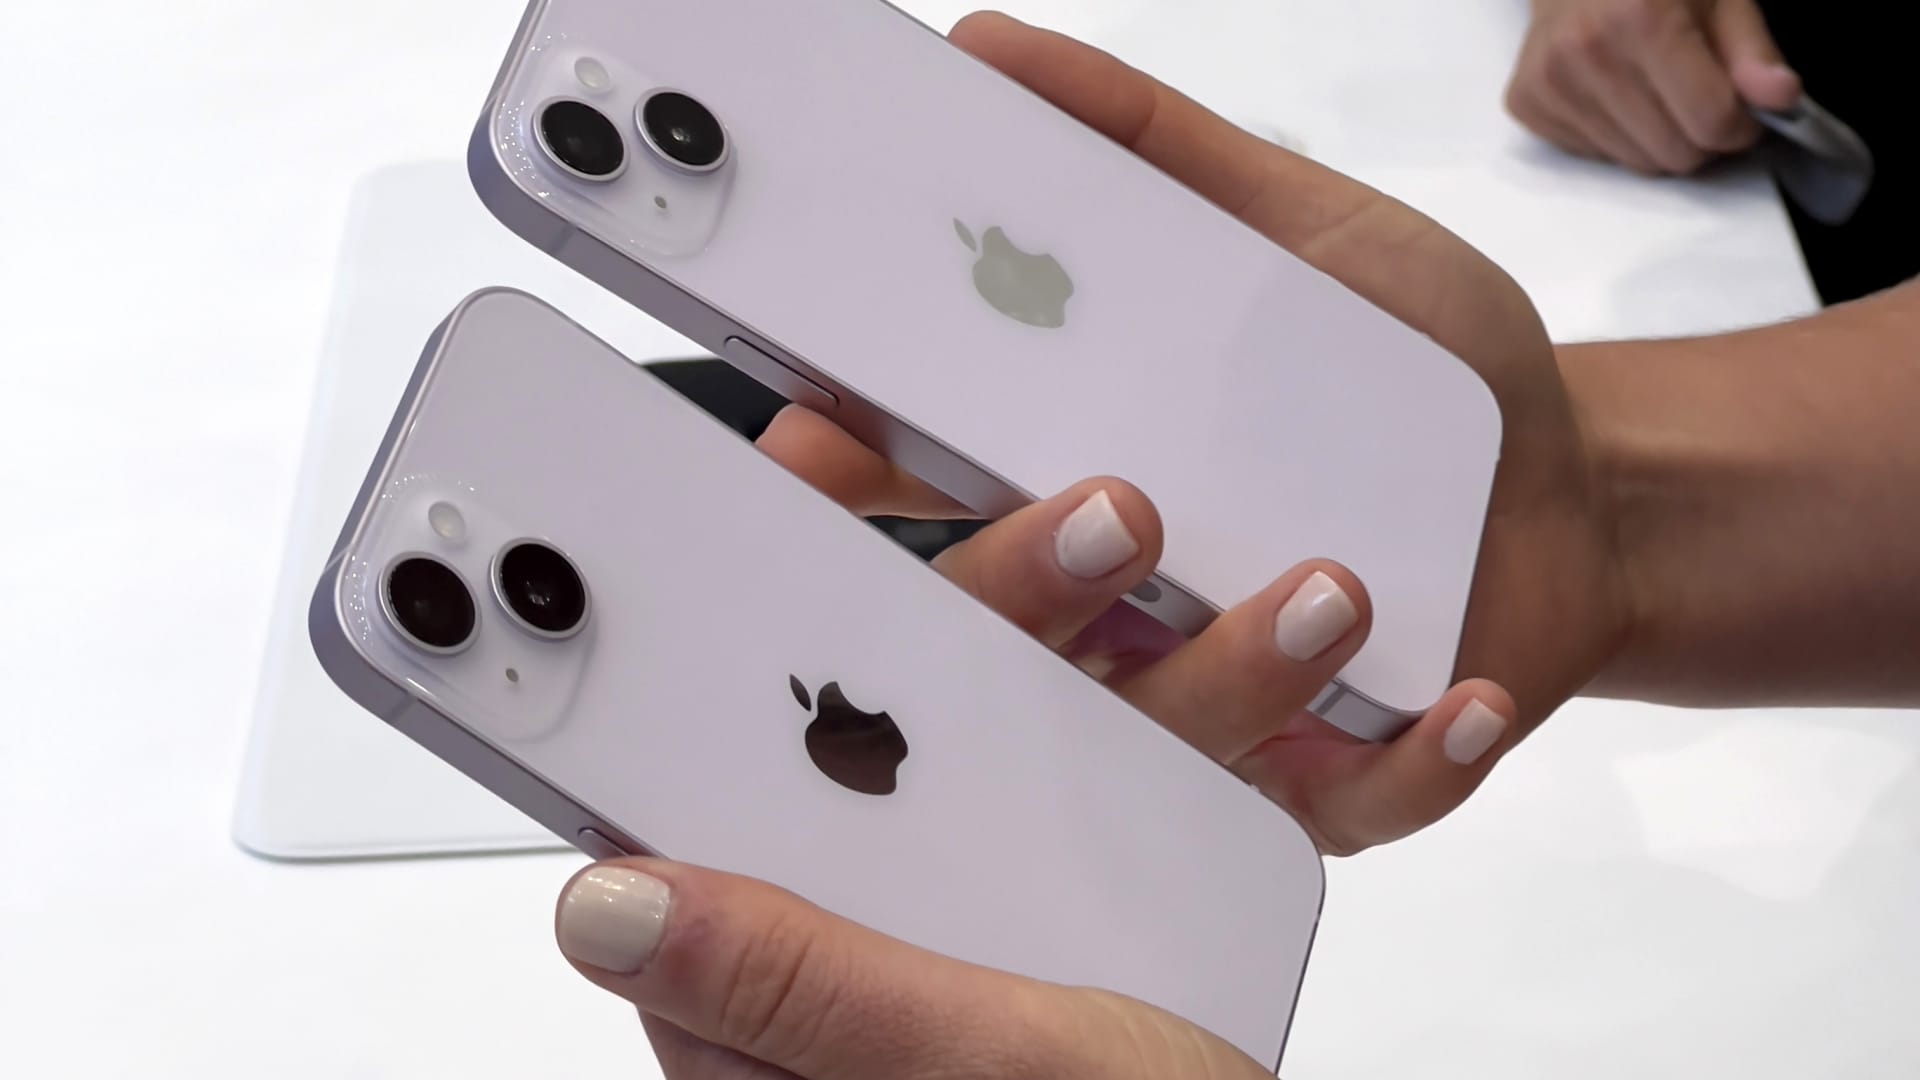 Apple issues iPhone update to fix shaking camera hard reset bugs – CNBC